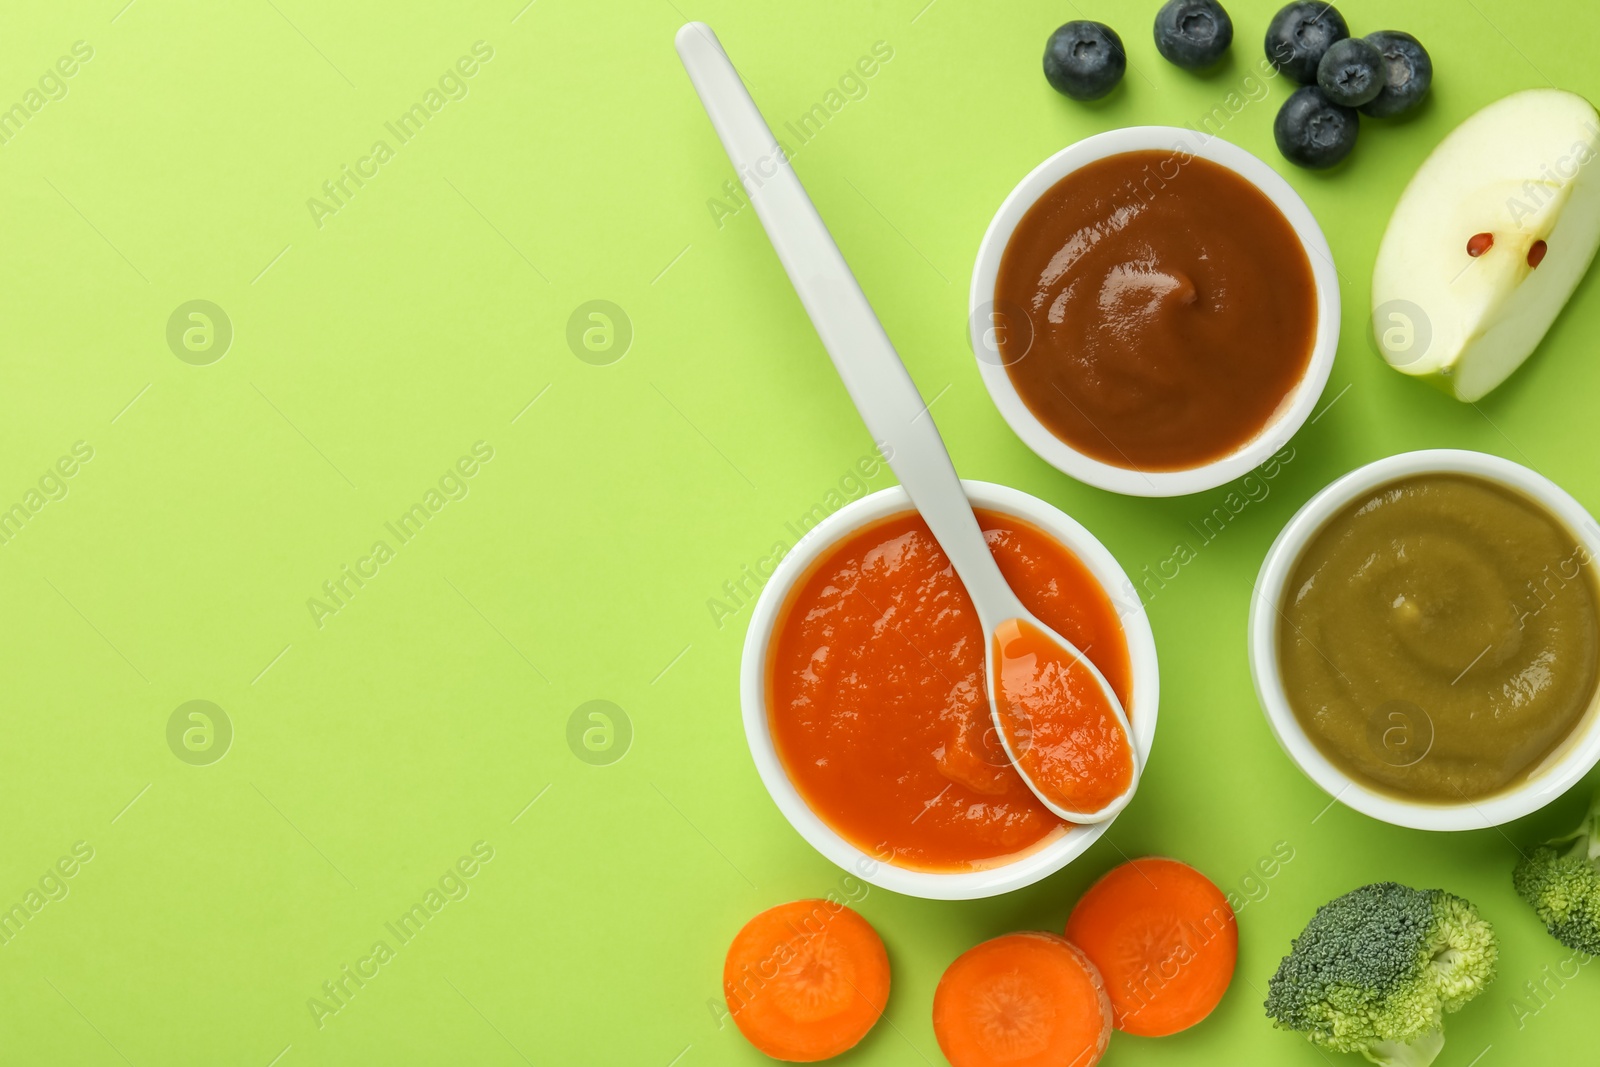 Photo of Bowls with healthy baby food, vegetables, fruits and spoon on light green background, flat lay. Space for text